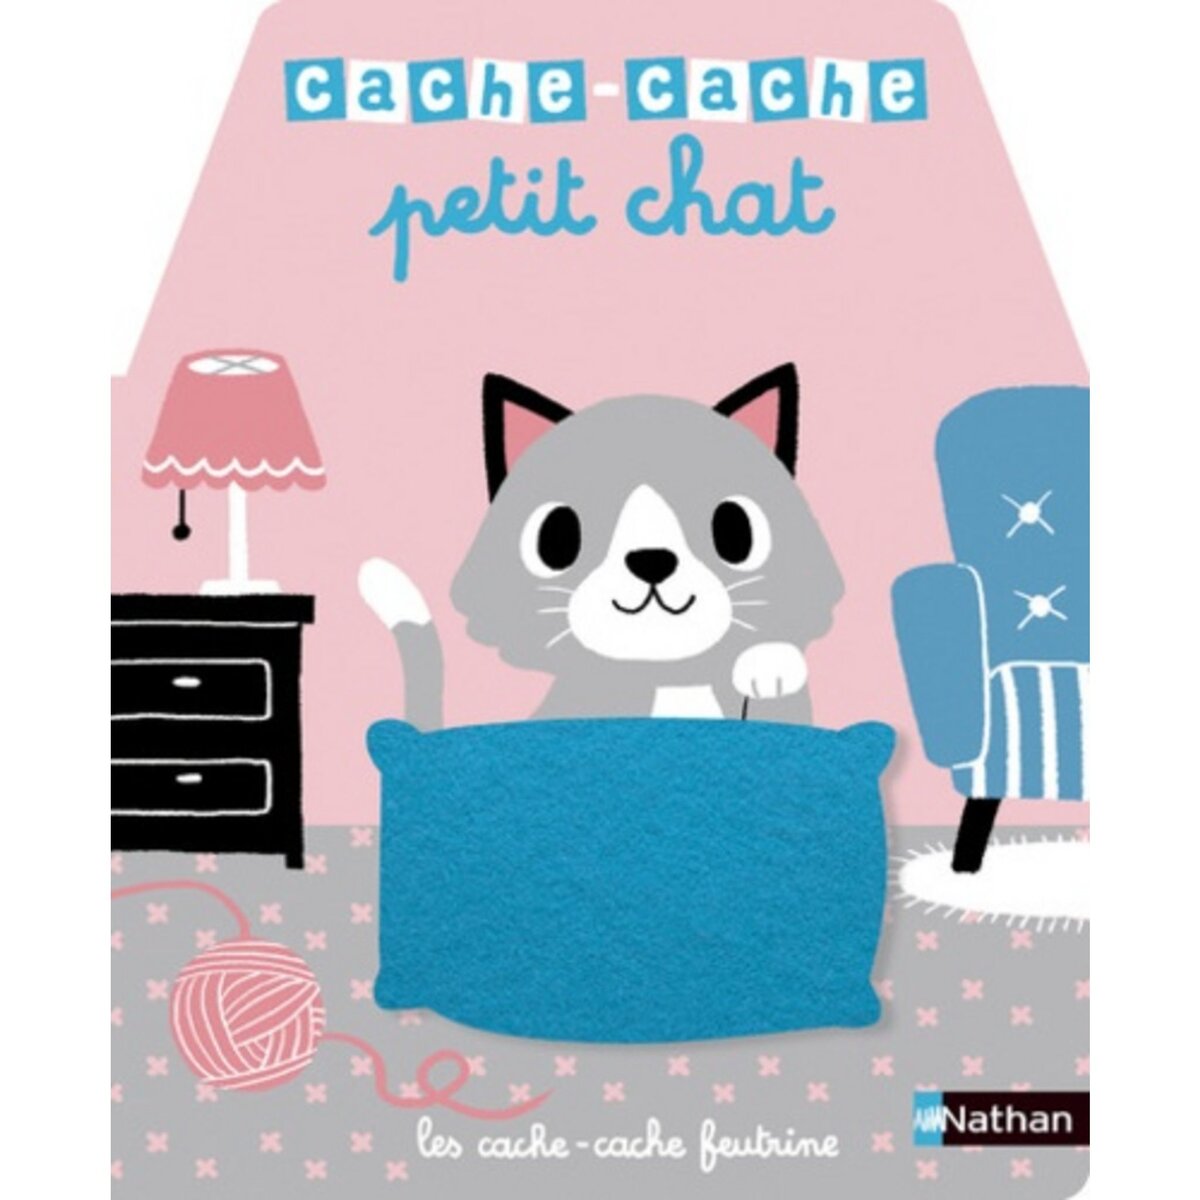  Cache-cage petit chat, Huang Yu-Hsuan